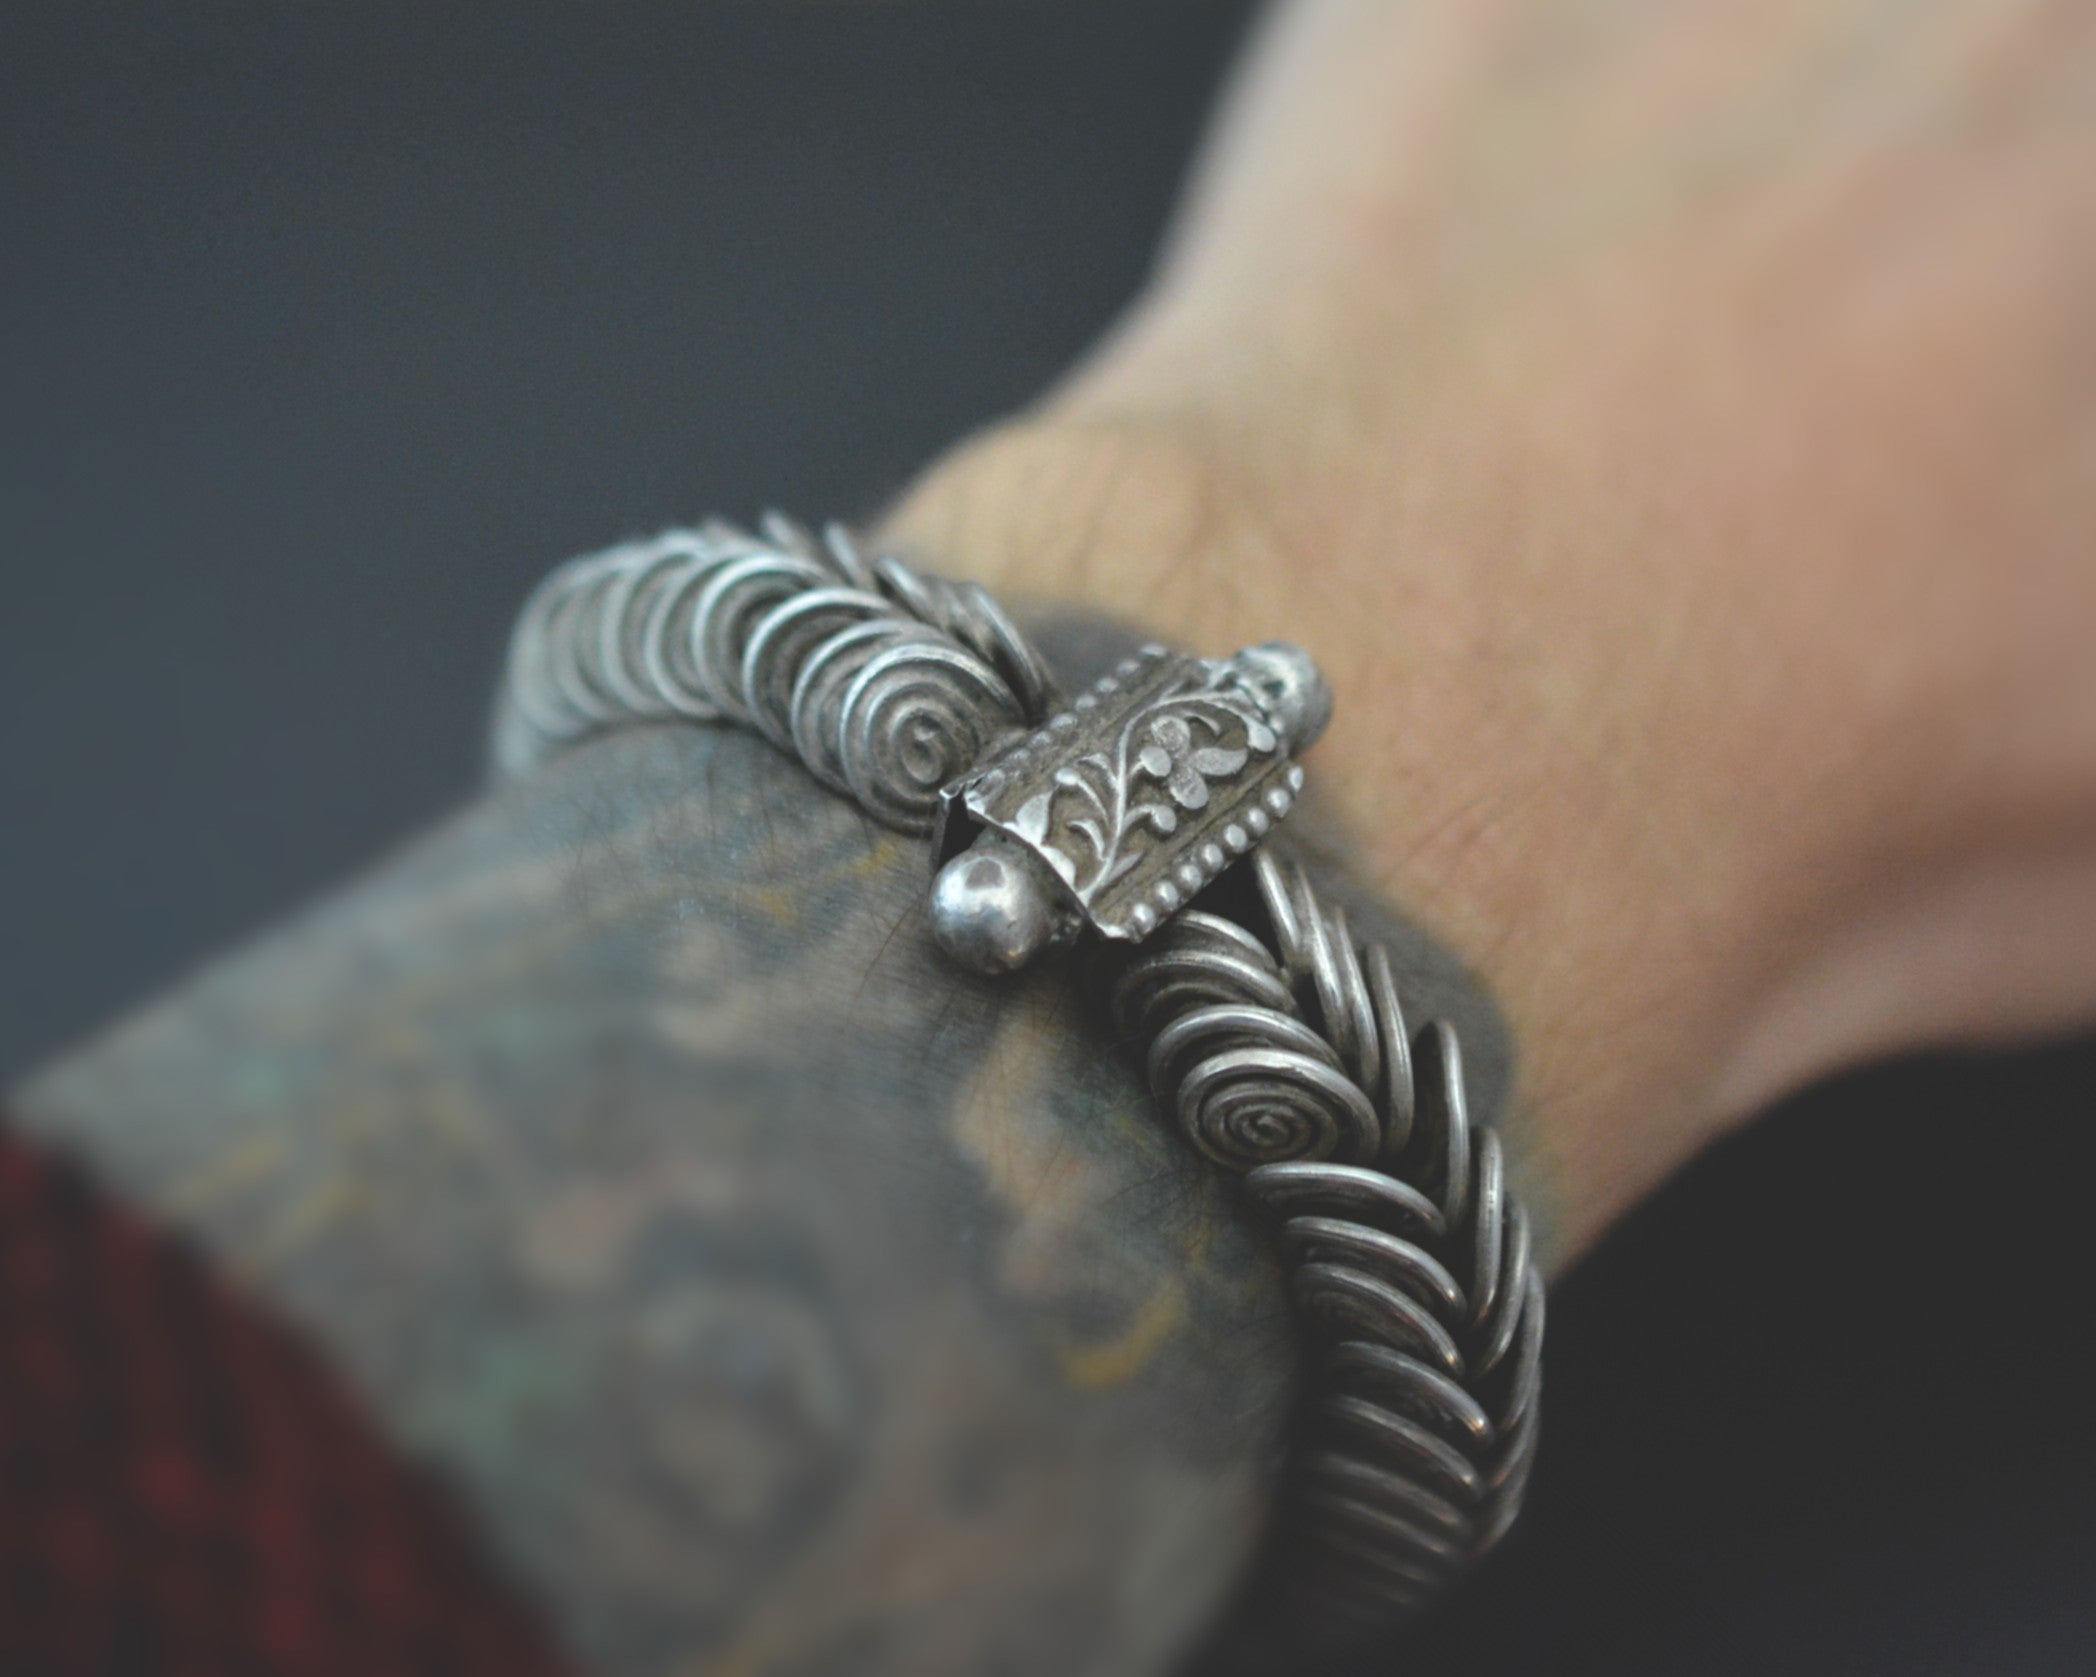 XSmall Ethnic Tribal Indian Silver Bracelet - Hinged - XS